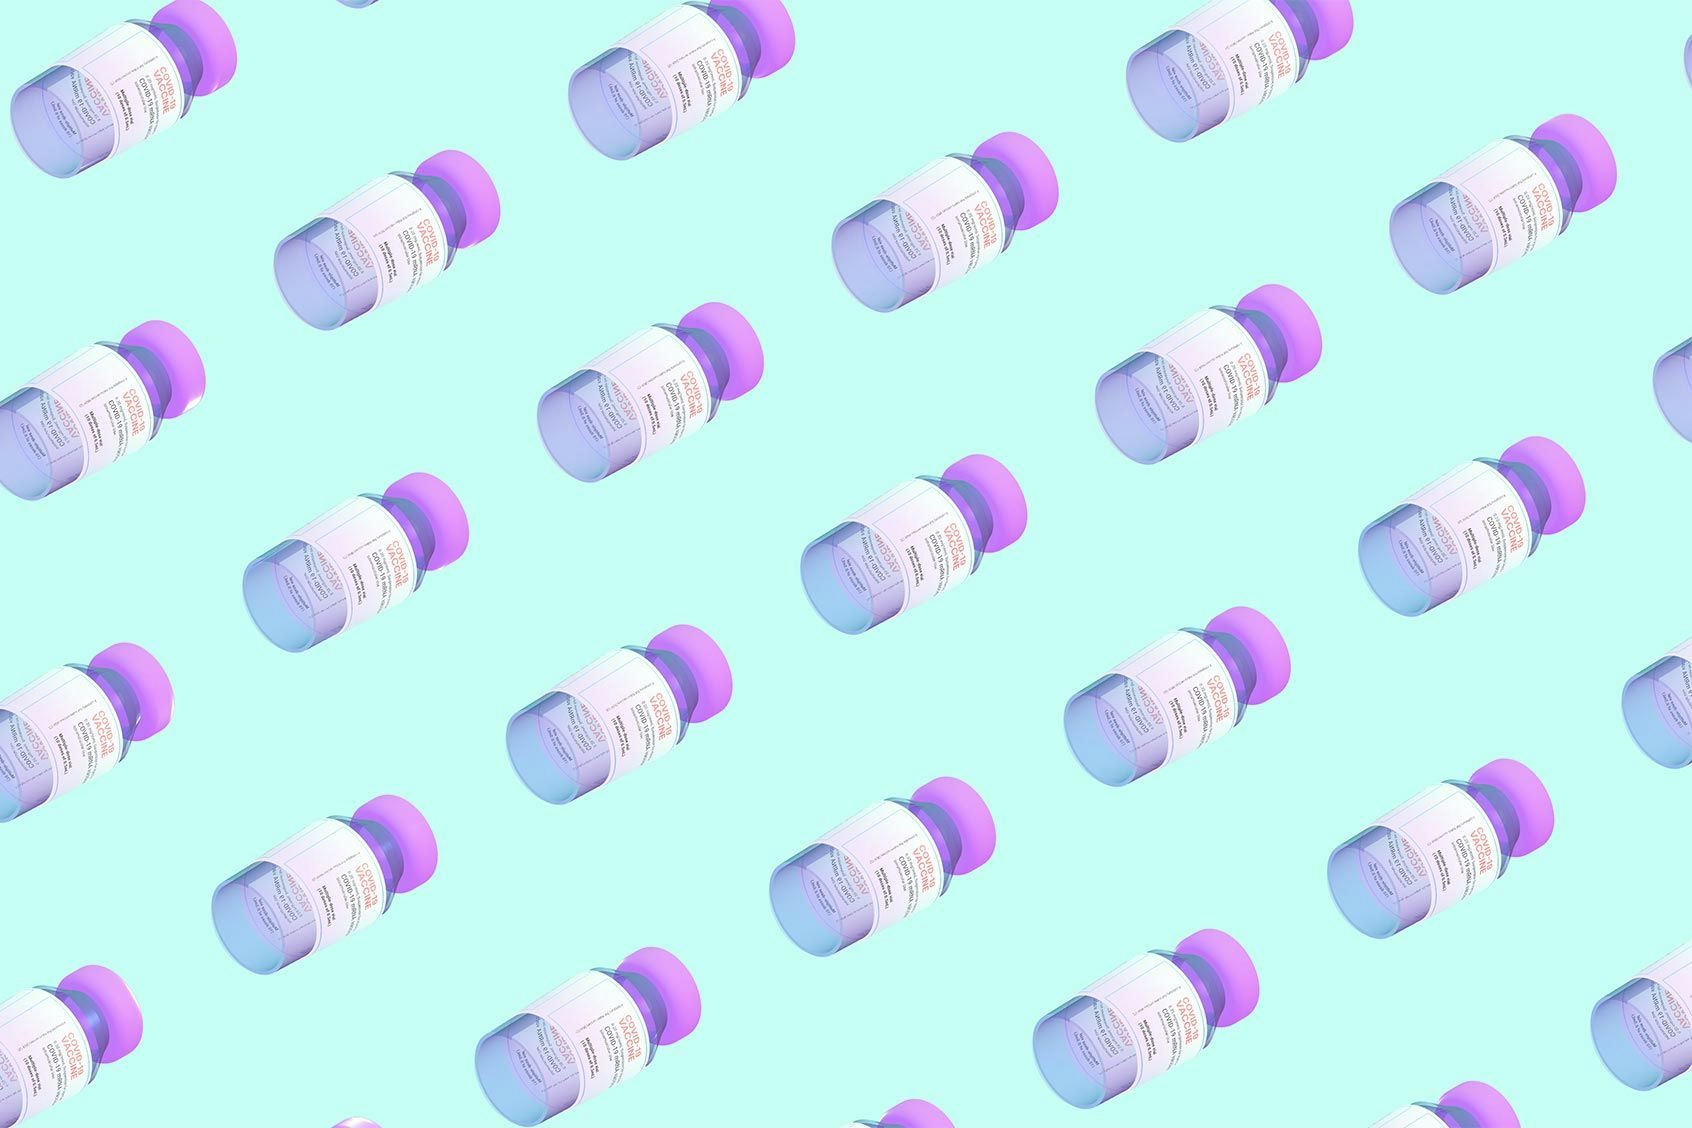 3D rendered vials of COVID vaccine in a grid pattern